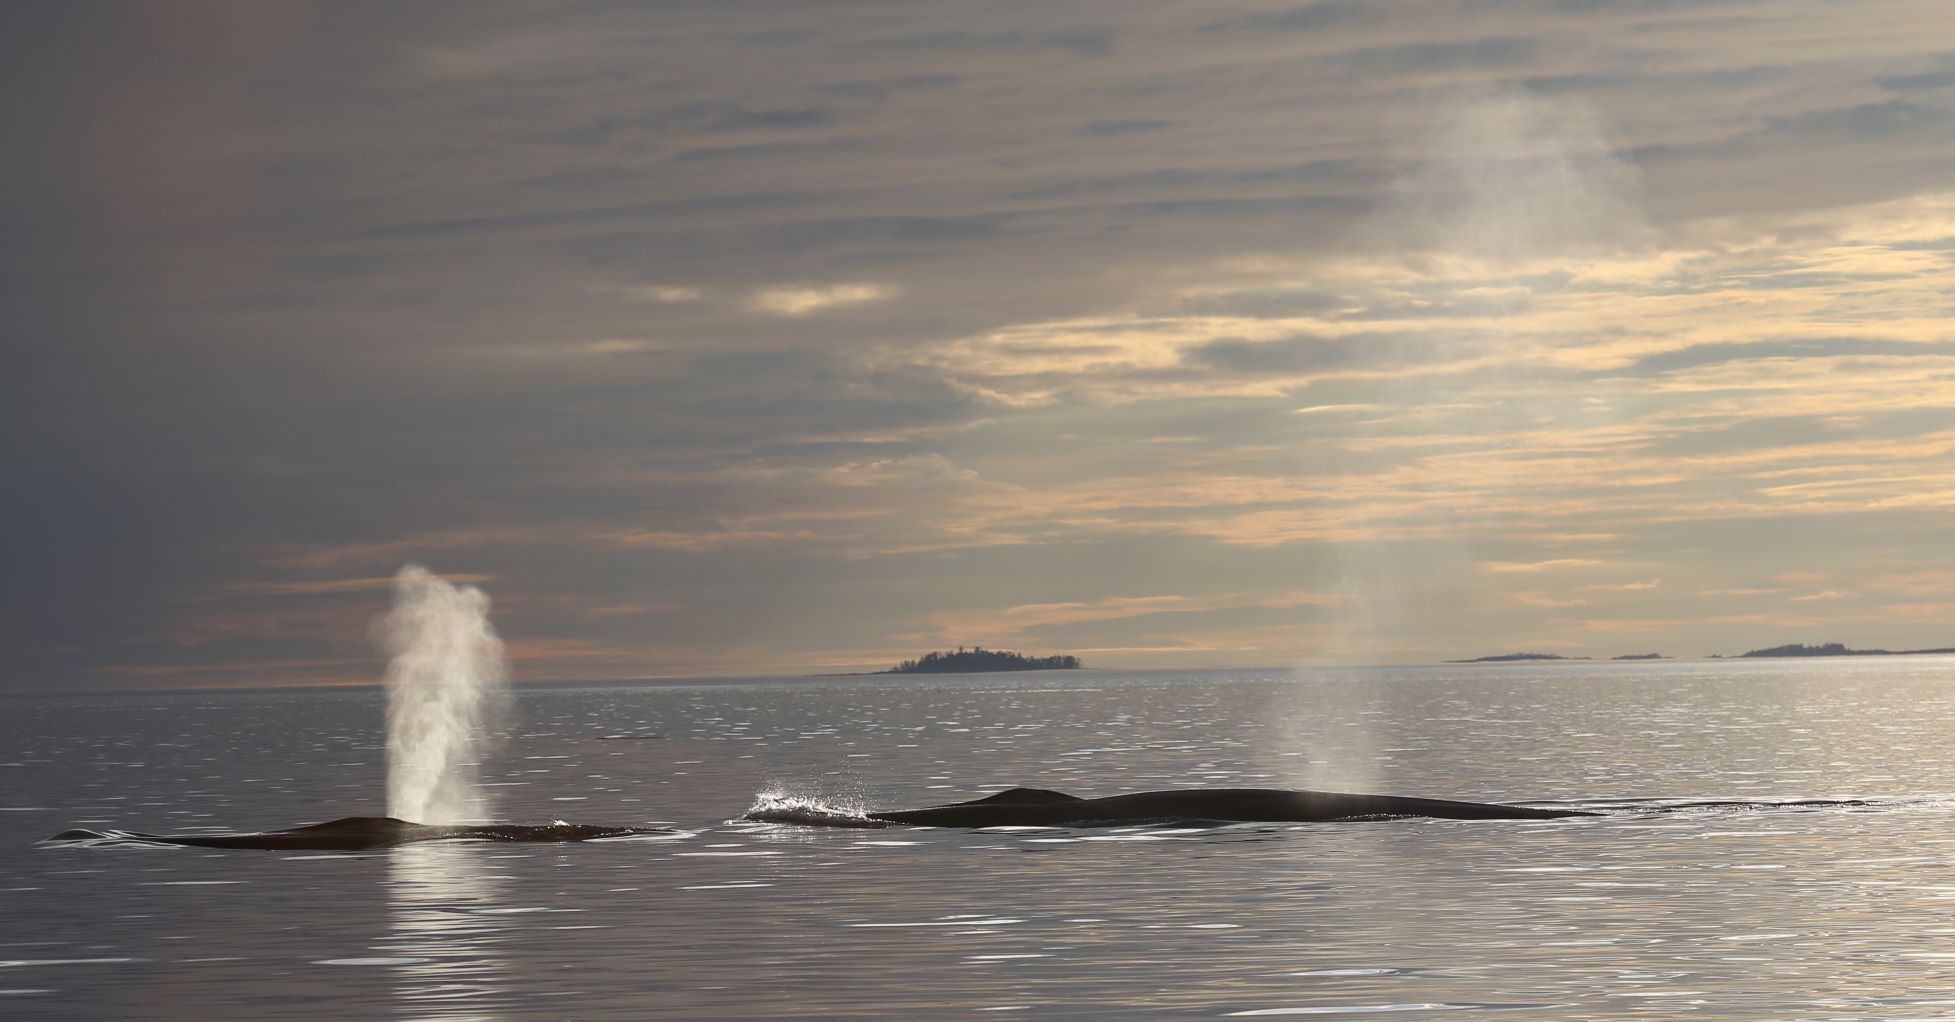 Two fin whales in Campania Sound (Gitga’at First Nation).